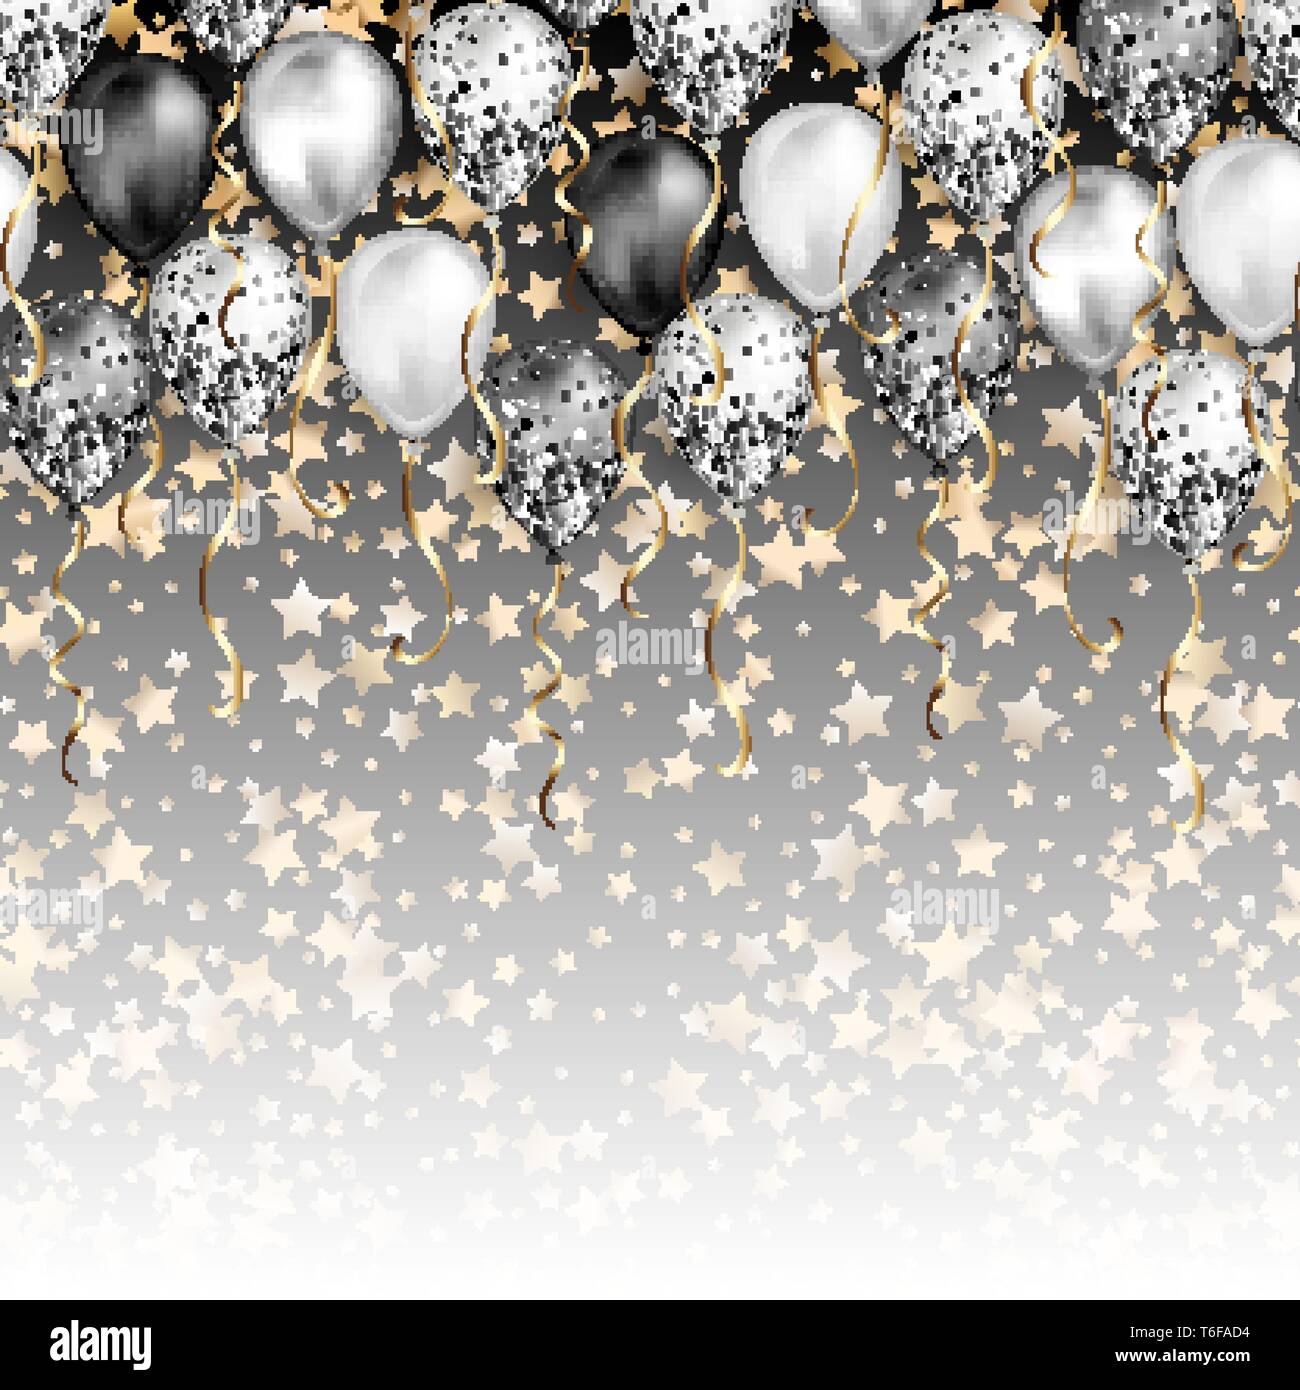 Background With Stars Confetti And Black And White Balloons As Top Border Shiny Glossy Realistic Ballon With Glitter And Gold Ribbon Vector Decorati Stock Vector Image Art Alamy